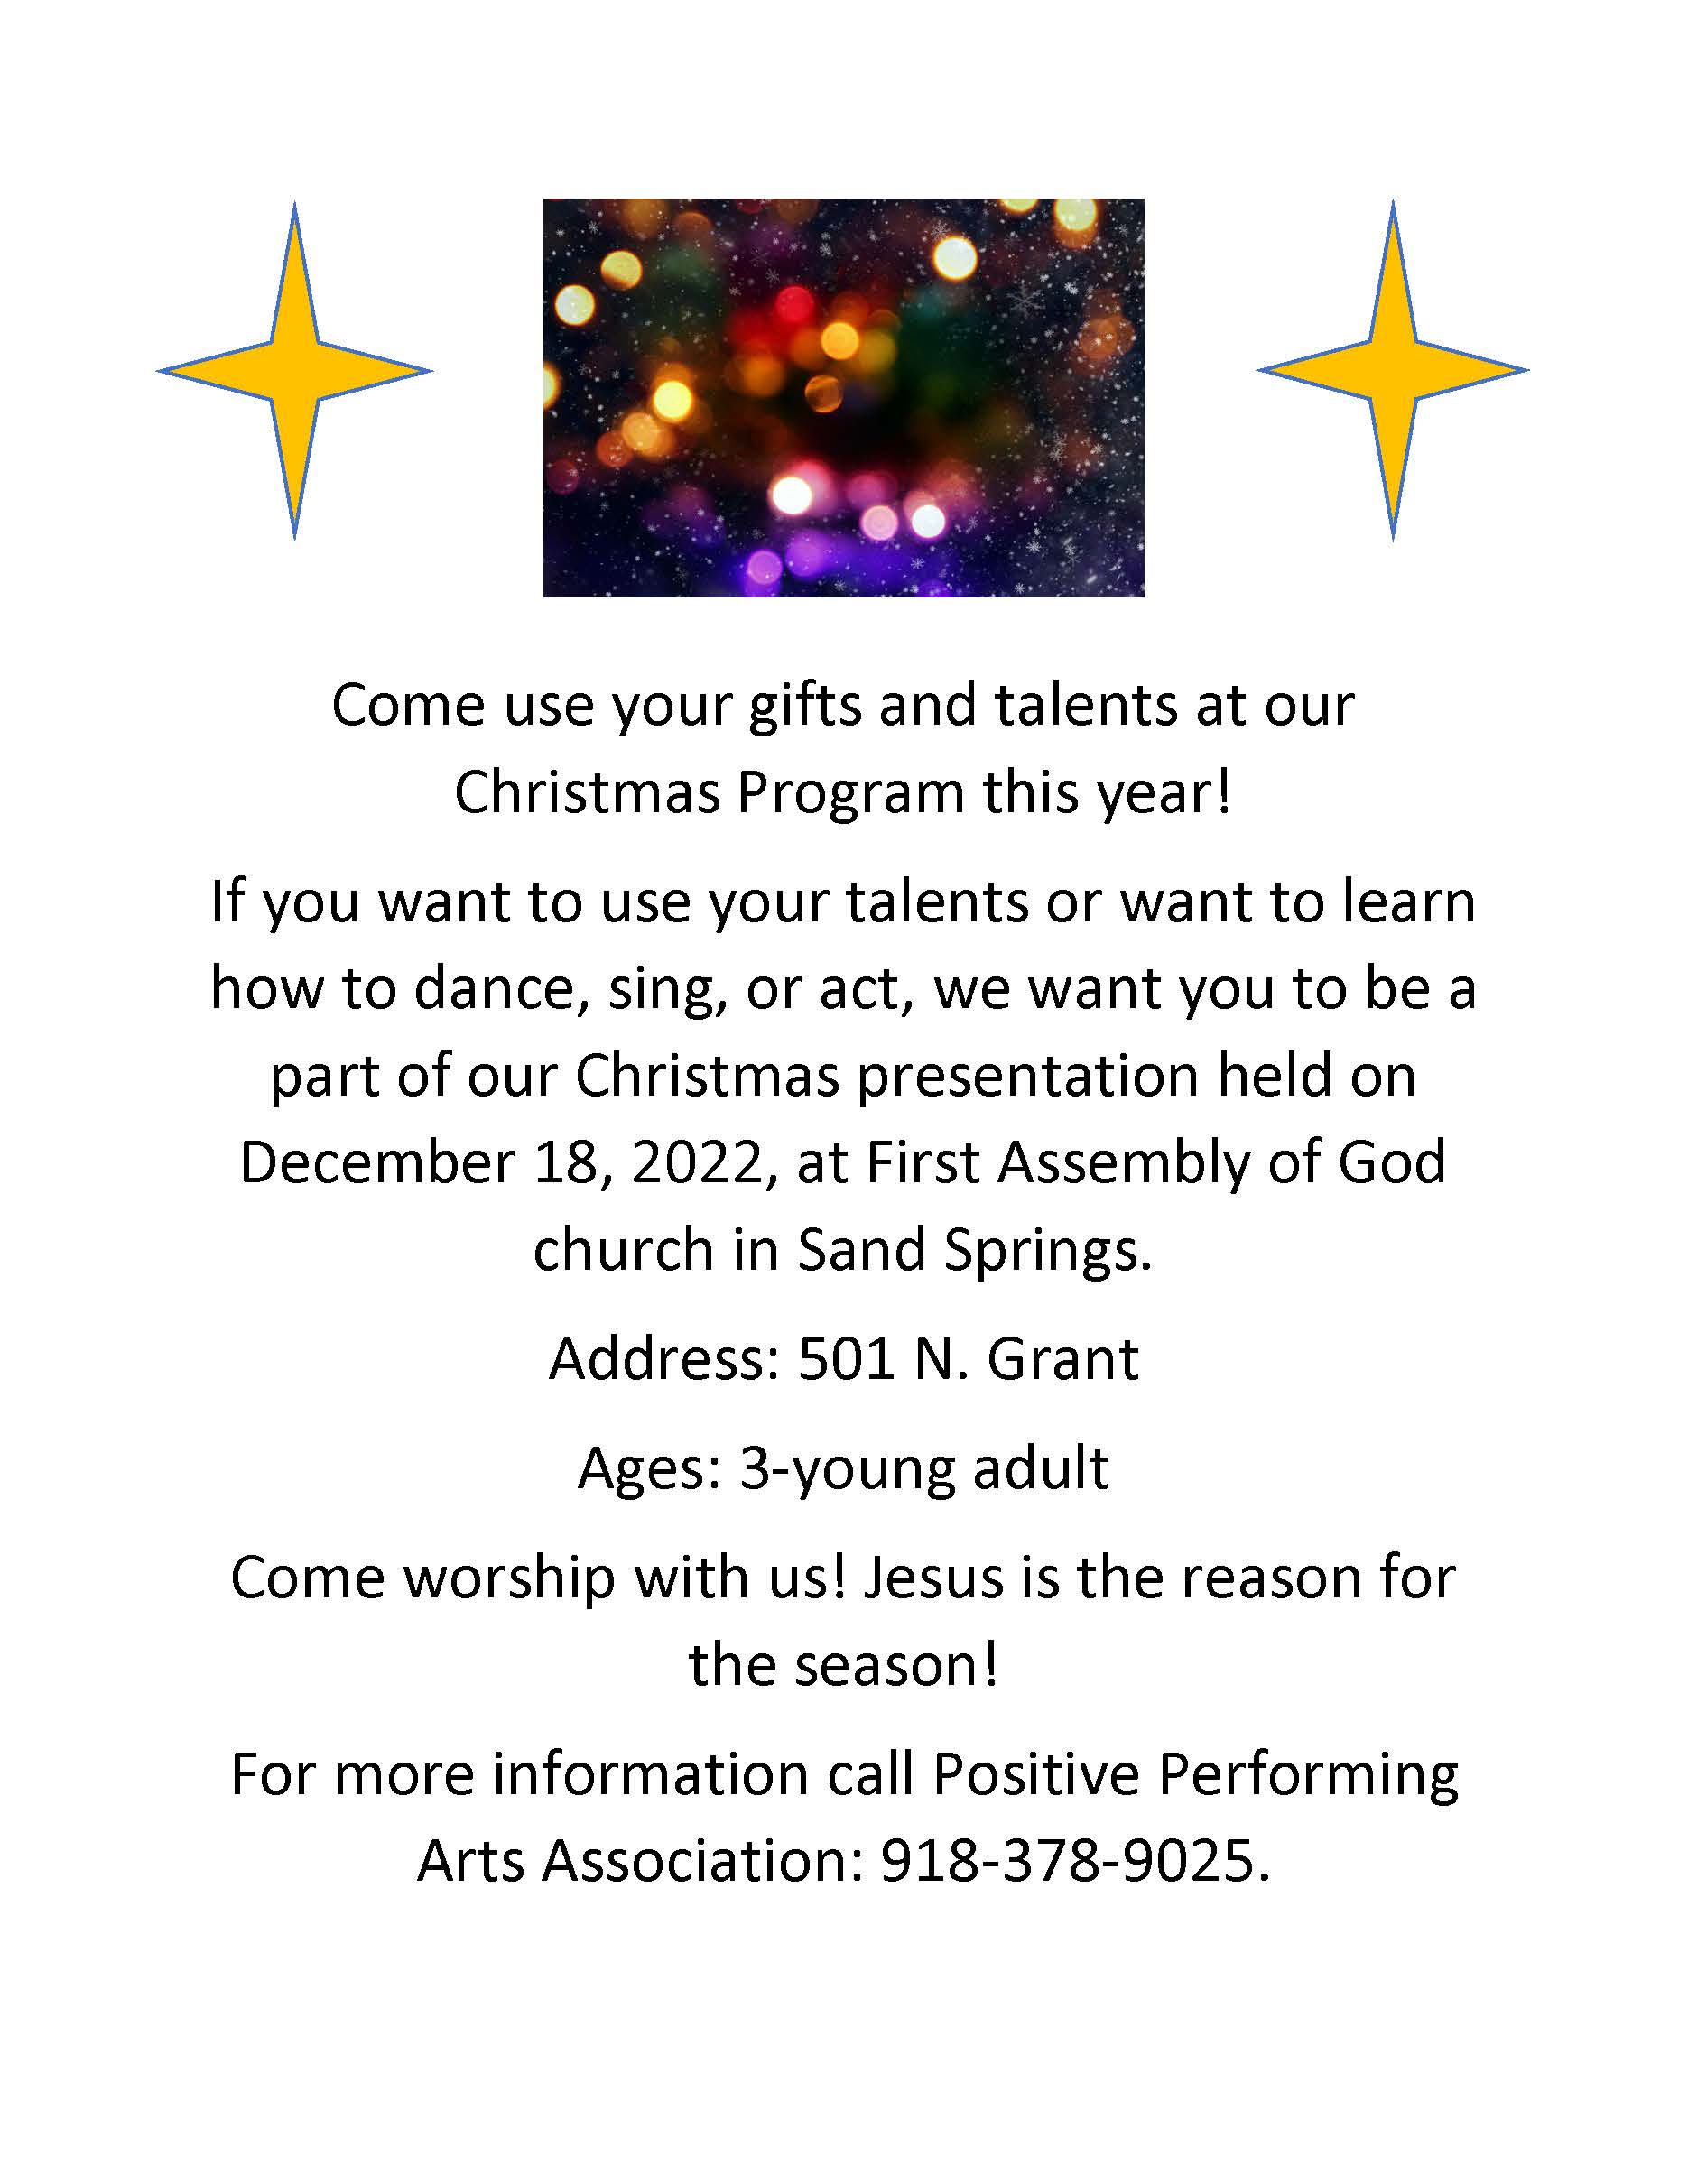 Sand Springs First Assembly Christmas Program Flyer (1)